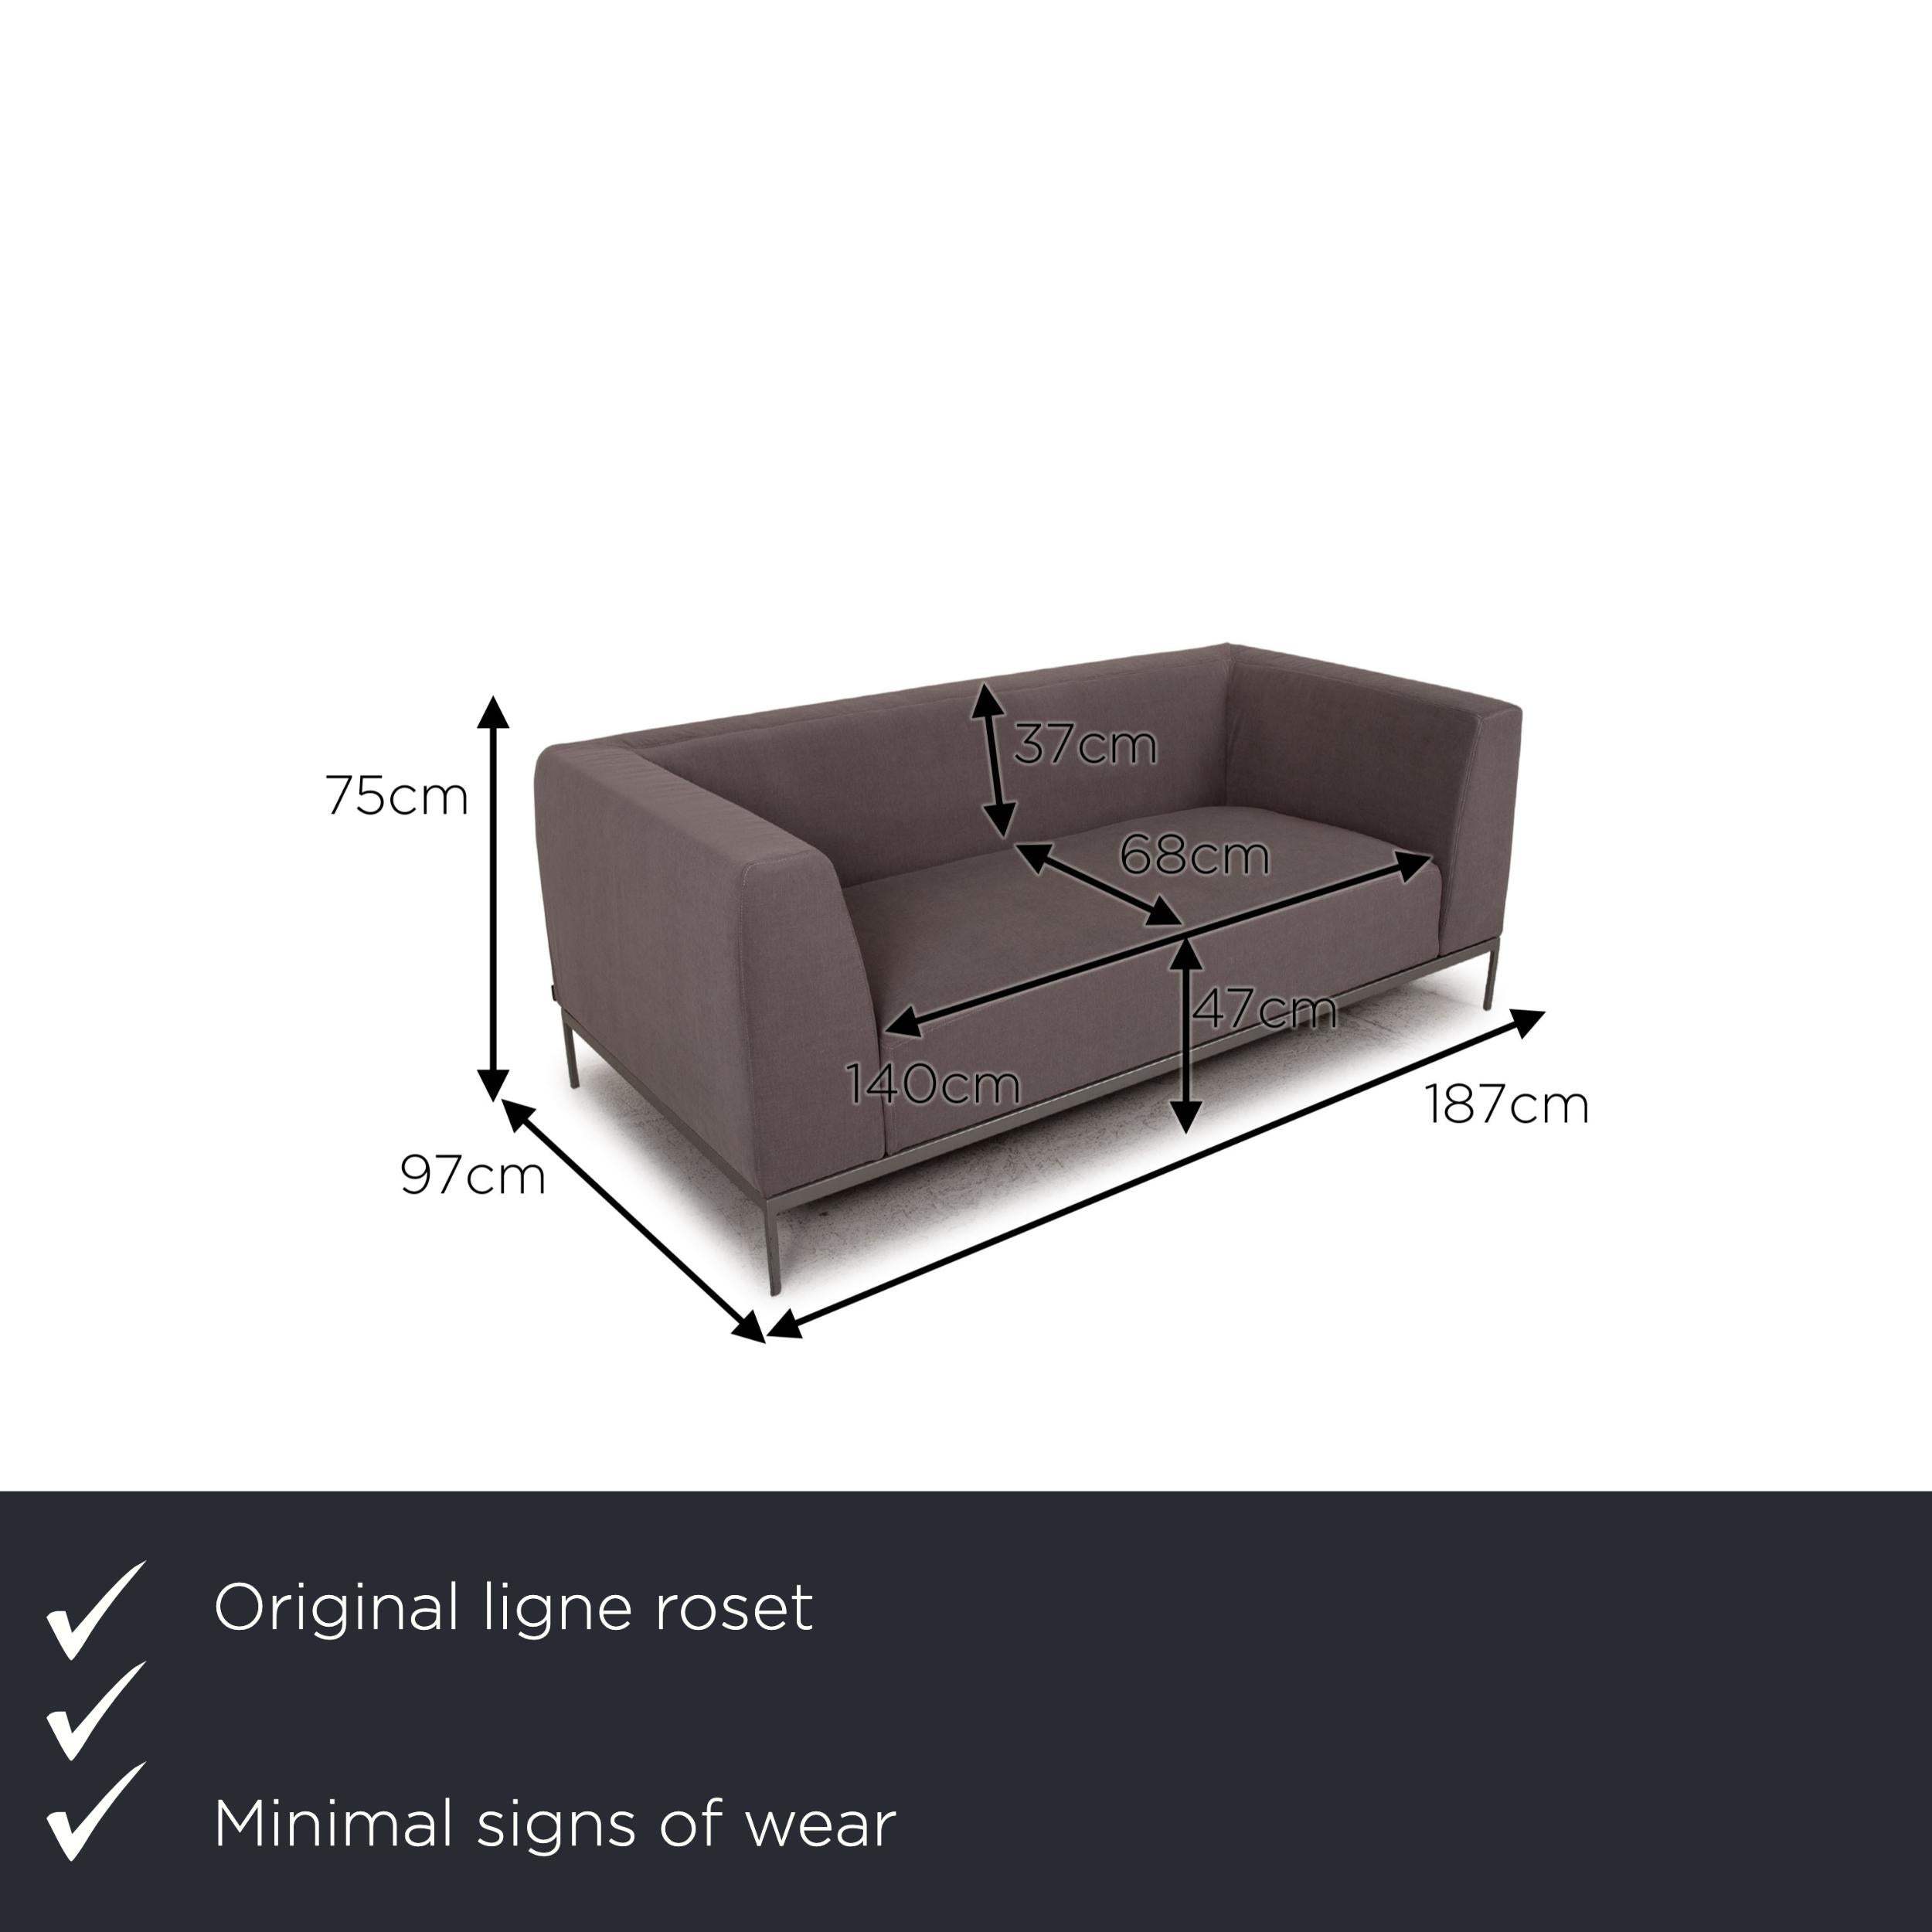 We present to you a ligne roset traversal fabric sofa gray two-seater couch.

Product measurements in centimeters:

Depth: 97
Width: 187
Height: 75
Seat height: 47
Rest height: 75
Seat depth: 68
Seat width: 140
Back height: 37.

   